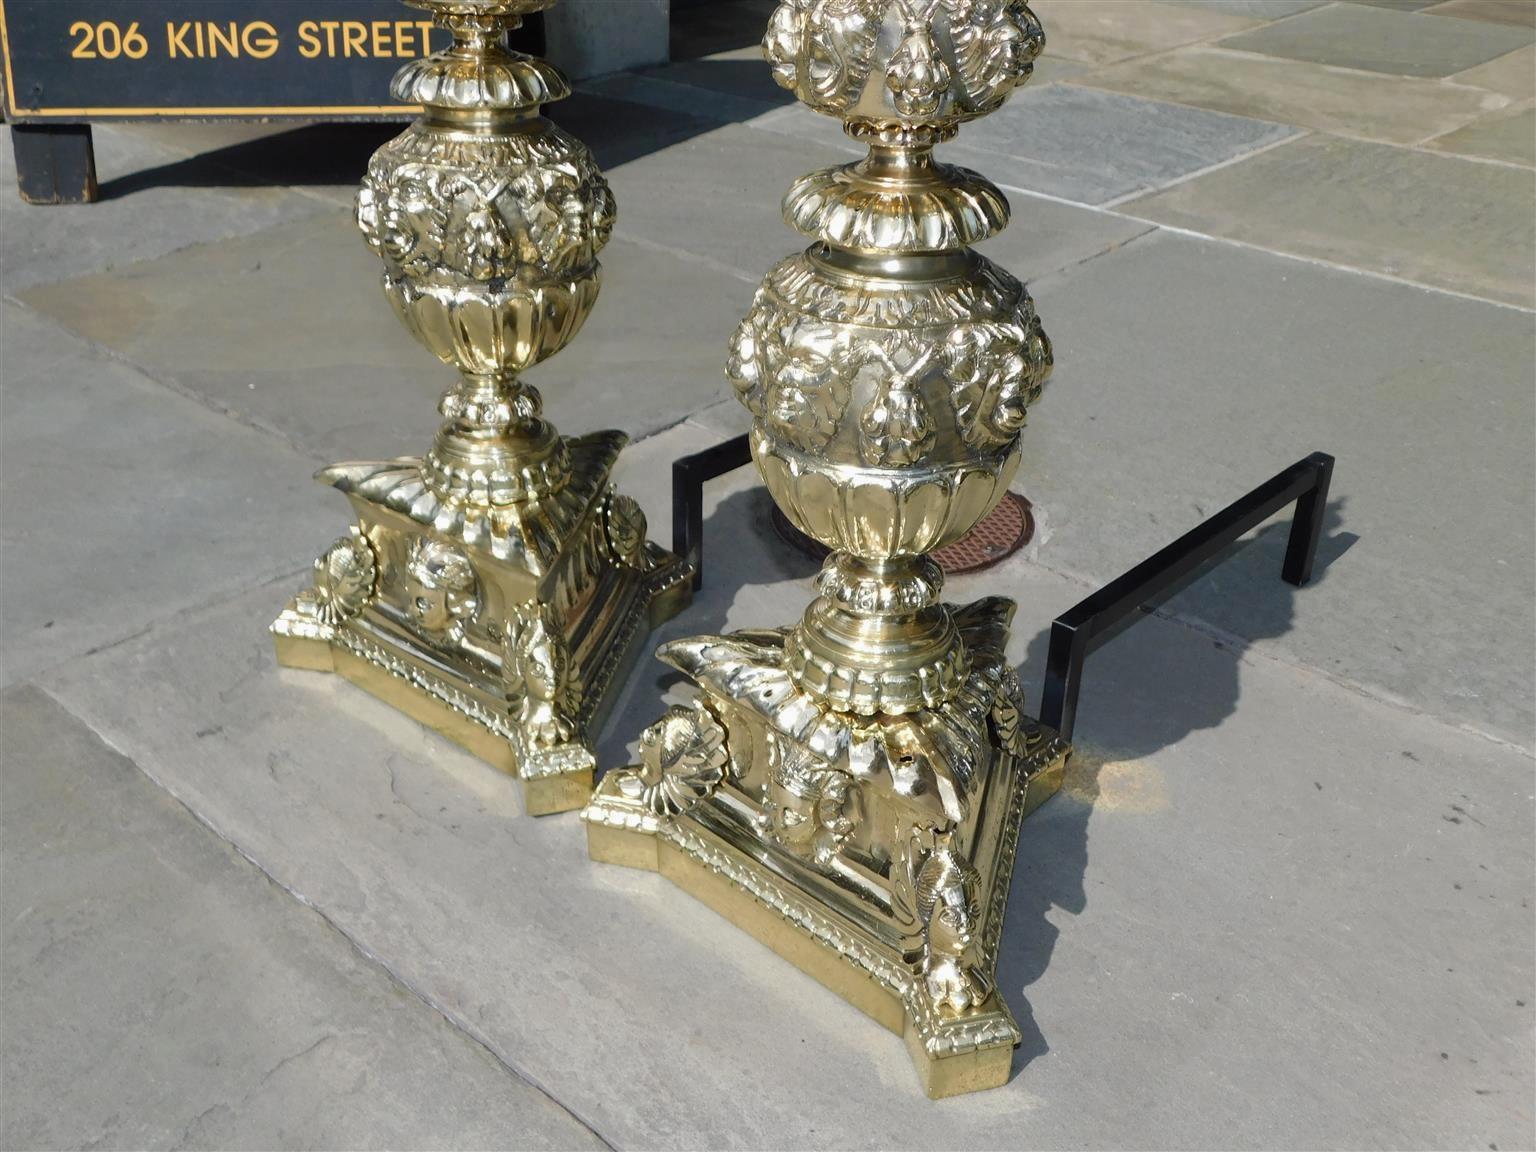 Pair of Italian Brass Neoclassical Figural Tiered Urn Finial Andirons, C. 1820 For Sale 3